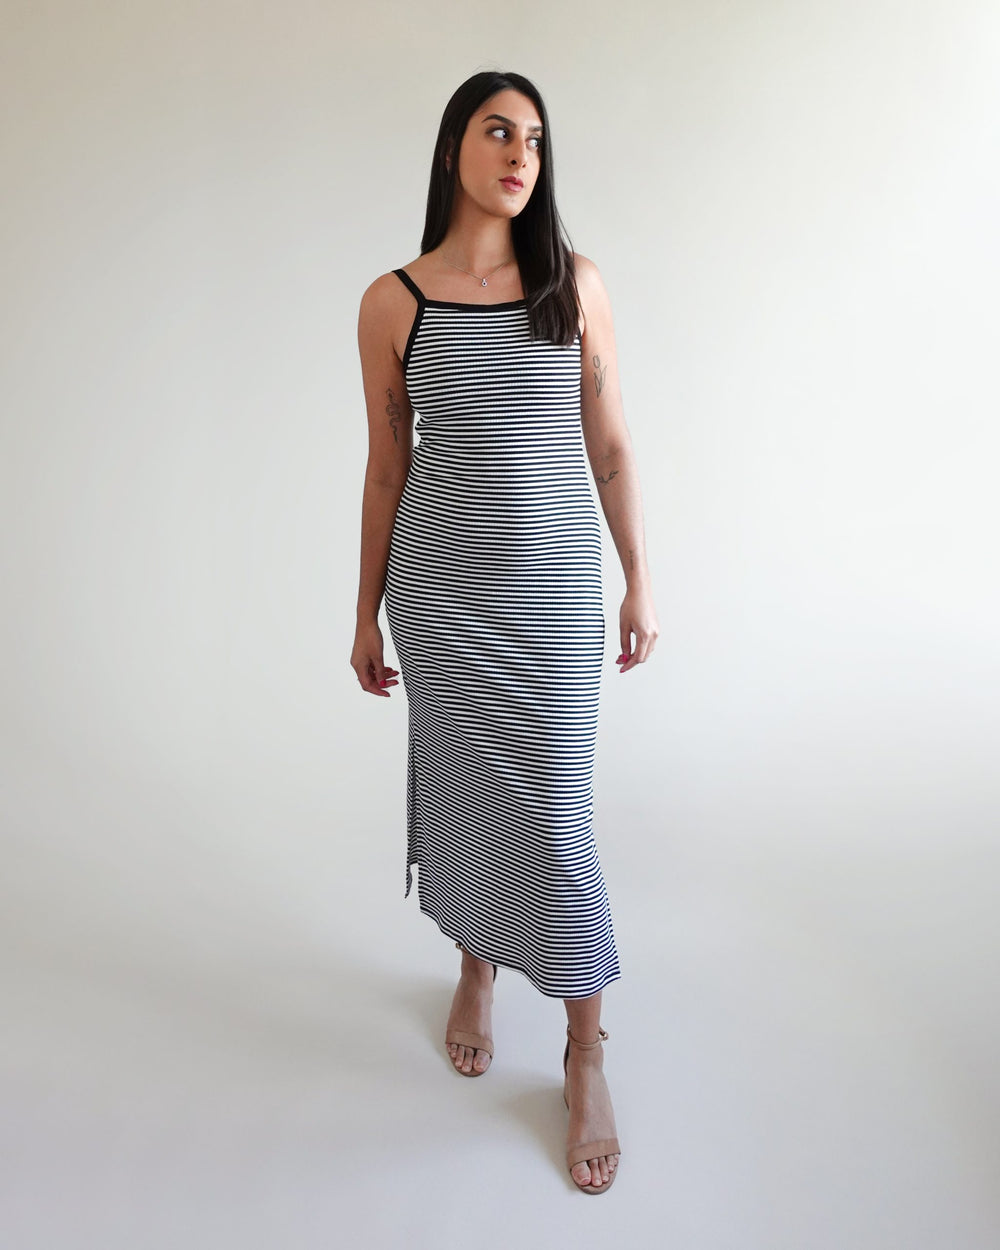 Woman wearing the Gia Dress sewing pattern from Tammy Handmade on The Fold Line. A midi dress pattern made in stretch knit fabric, featuring a figure-hugging silhouette, slightly curved neckline and armholes finished with binding, shelf bra for added supp